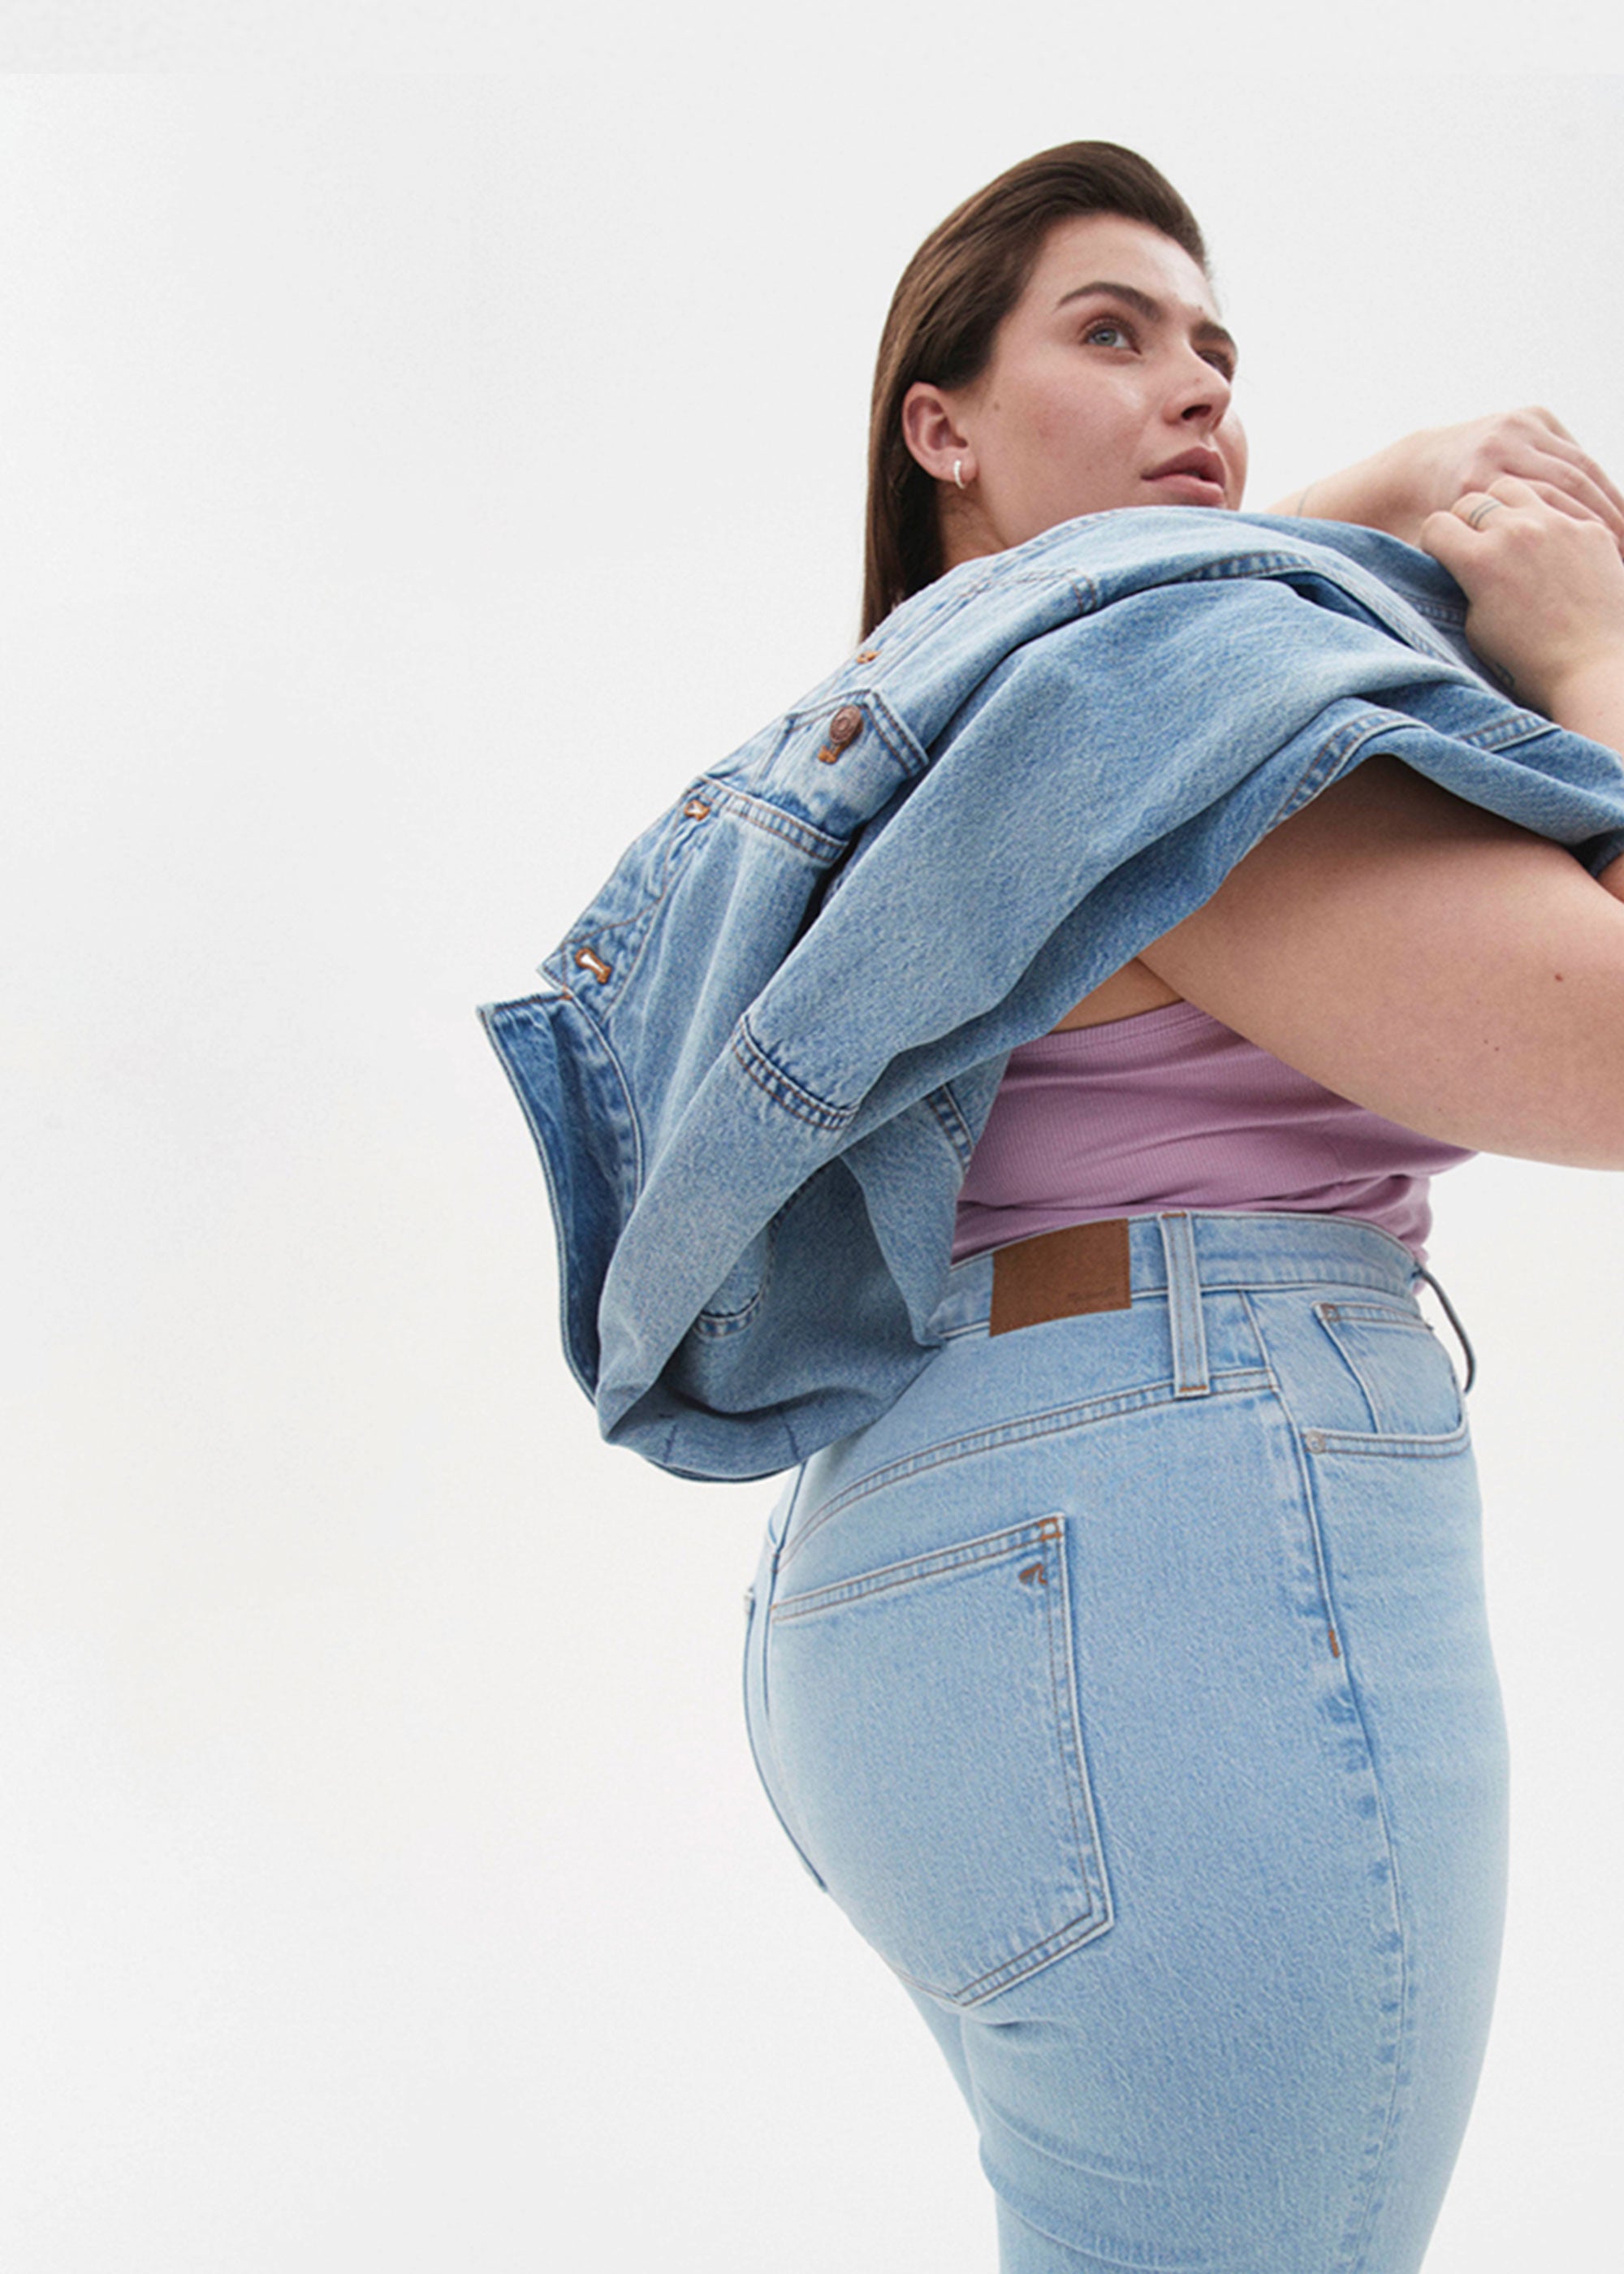 Individual wearing Madewell jeans and a lavender tank top, slinging a Madewell denim jacket over their shoulder